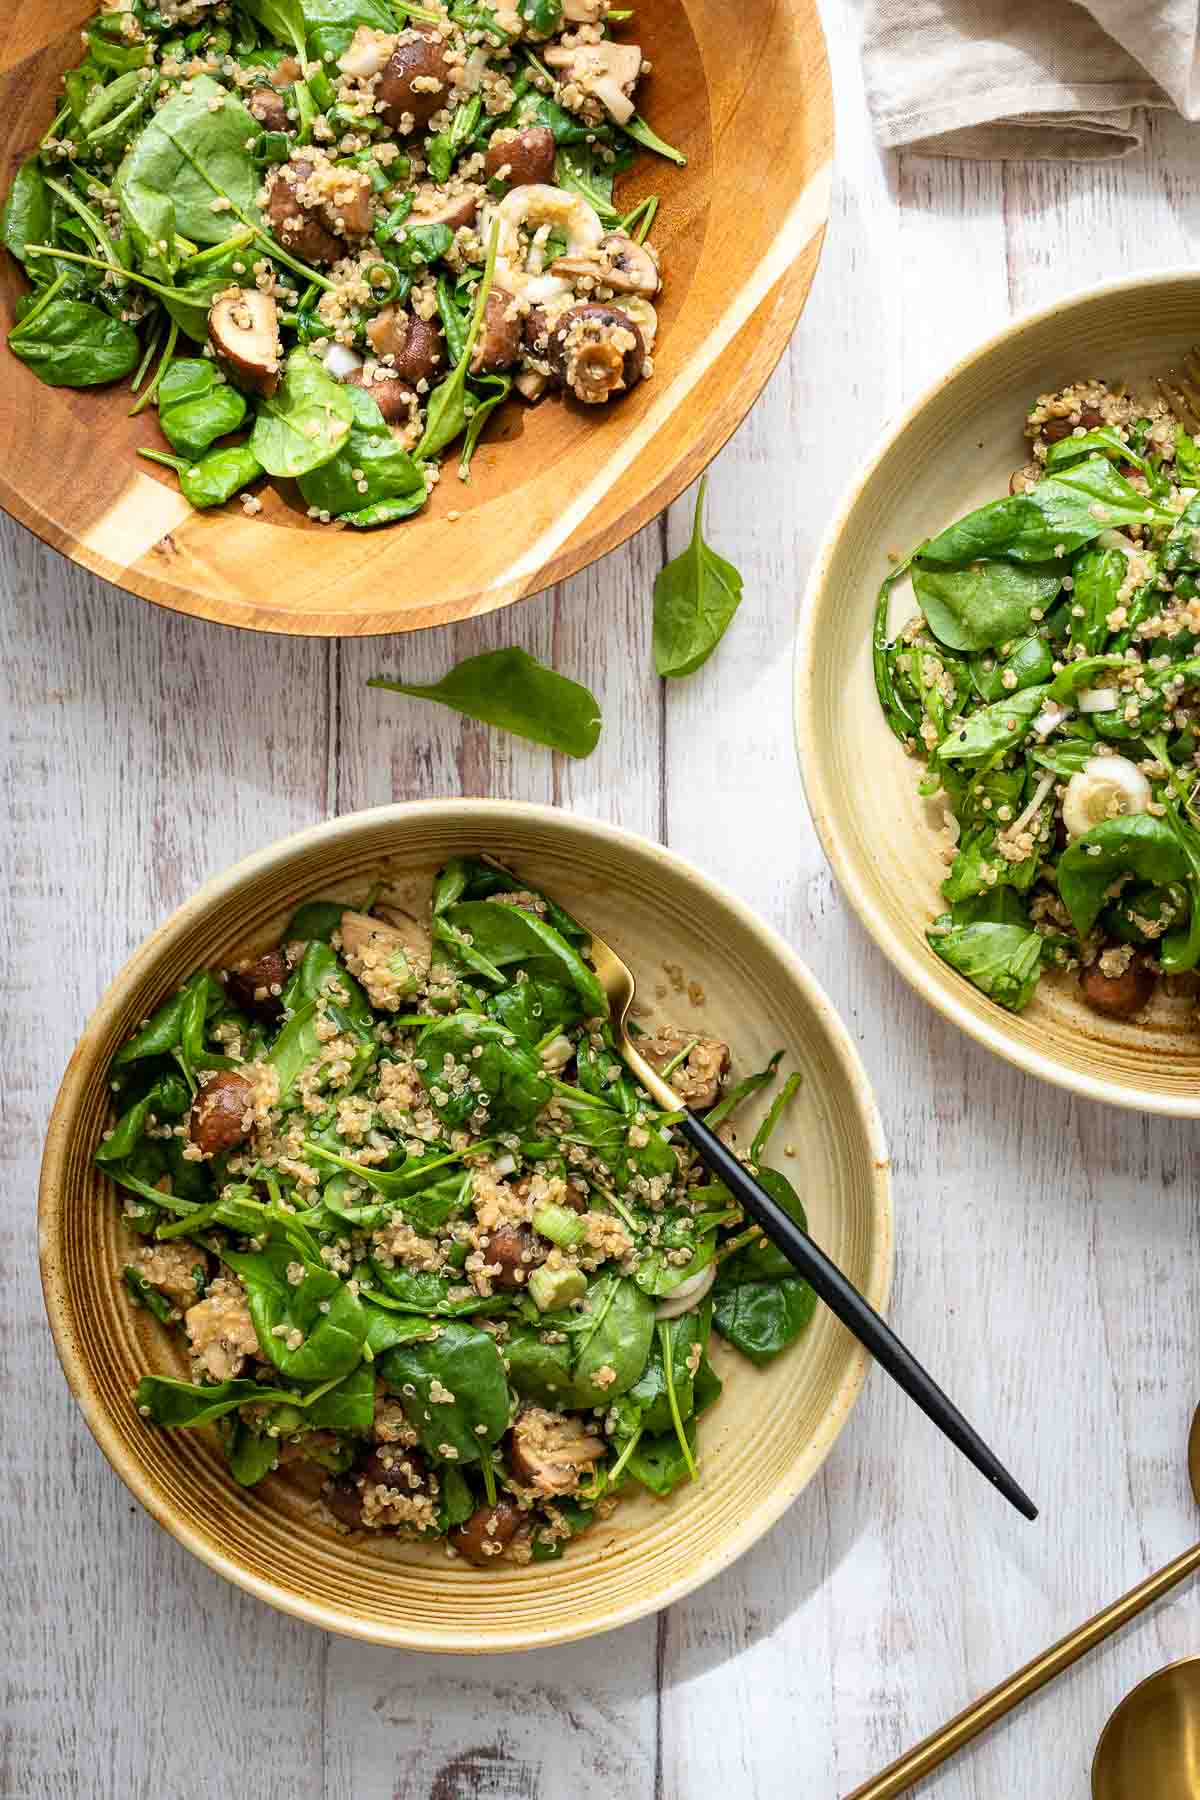 Quinoa Salad with Roasted Mushrooms and Soy-Sesame Dressing